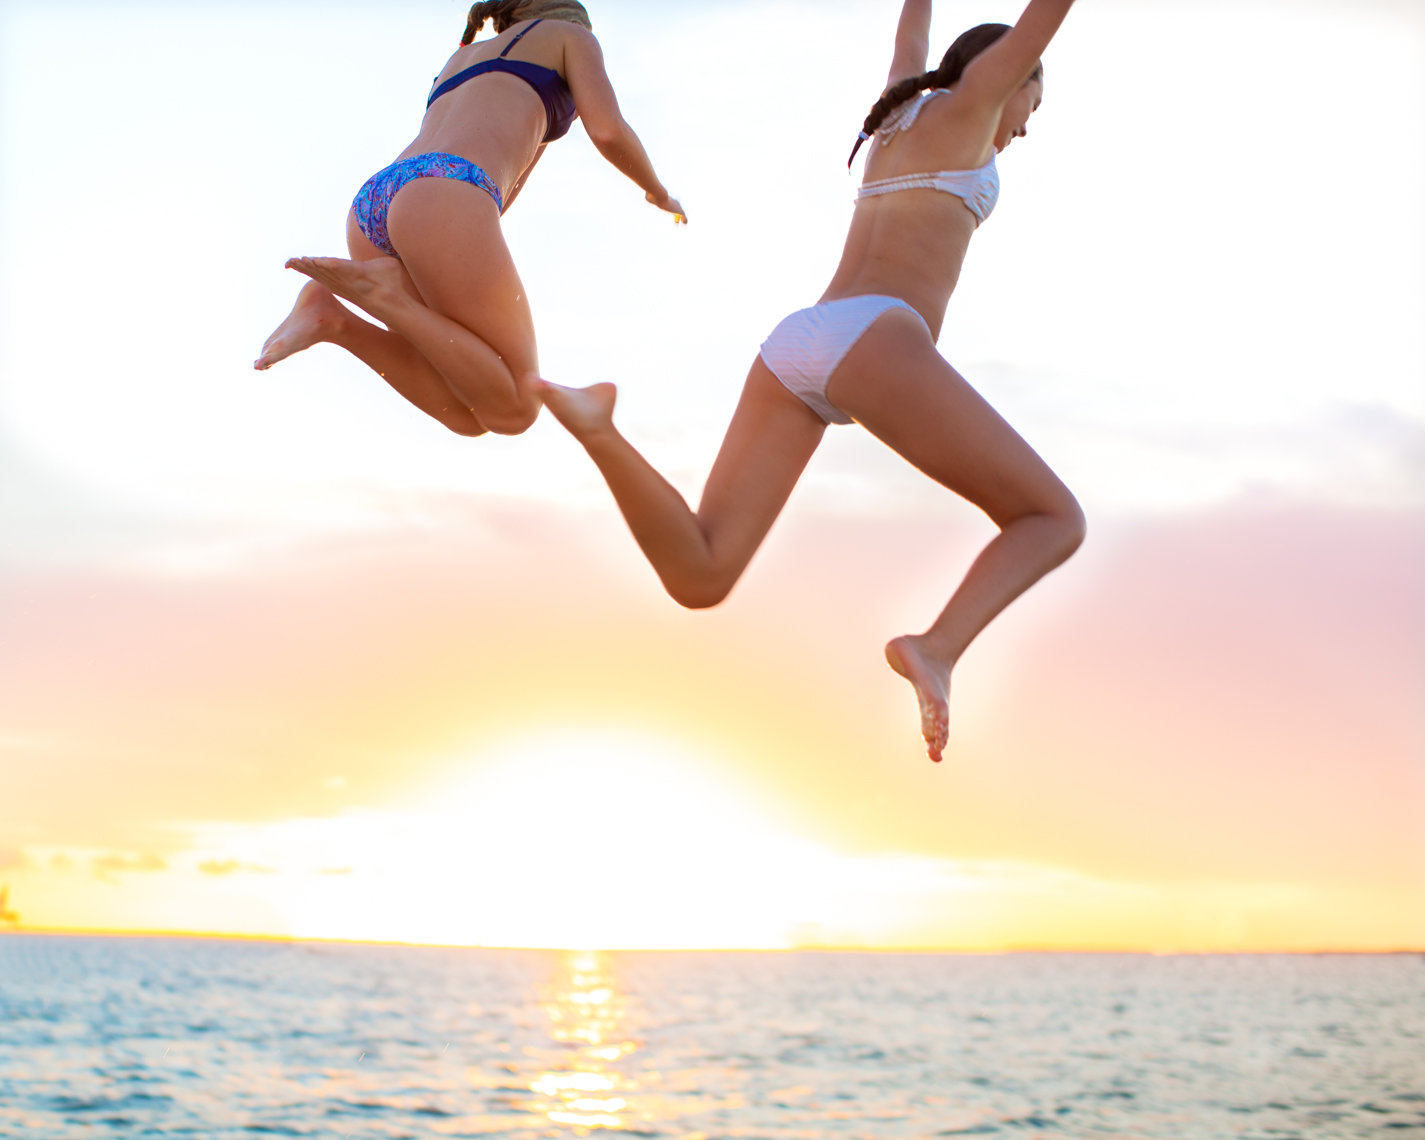 Teens leaping into ocean sunset | Commercial Lifestyle Photographer